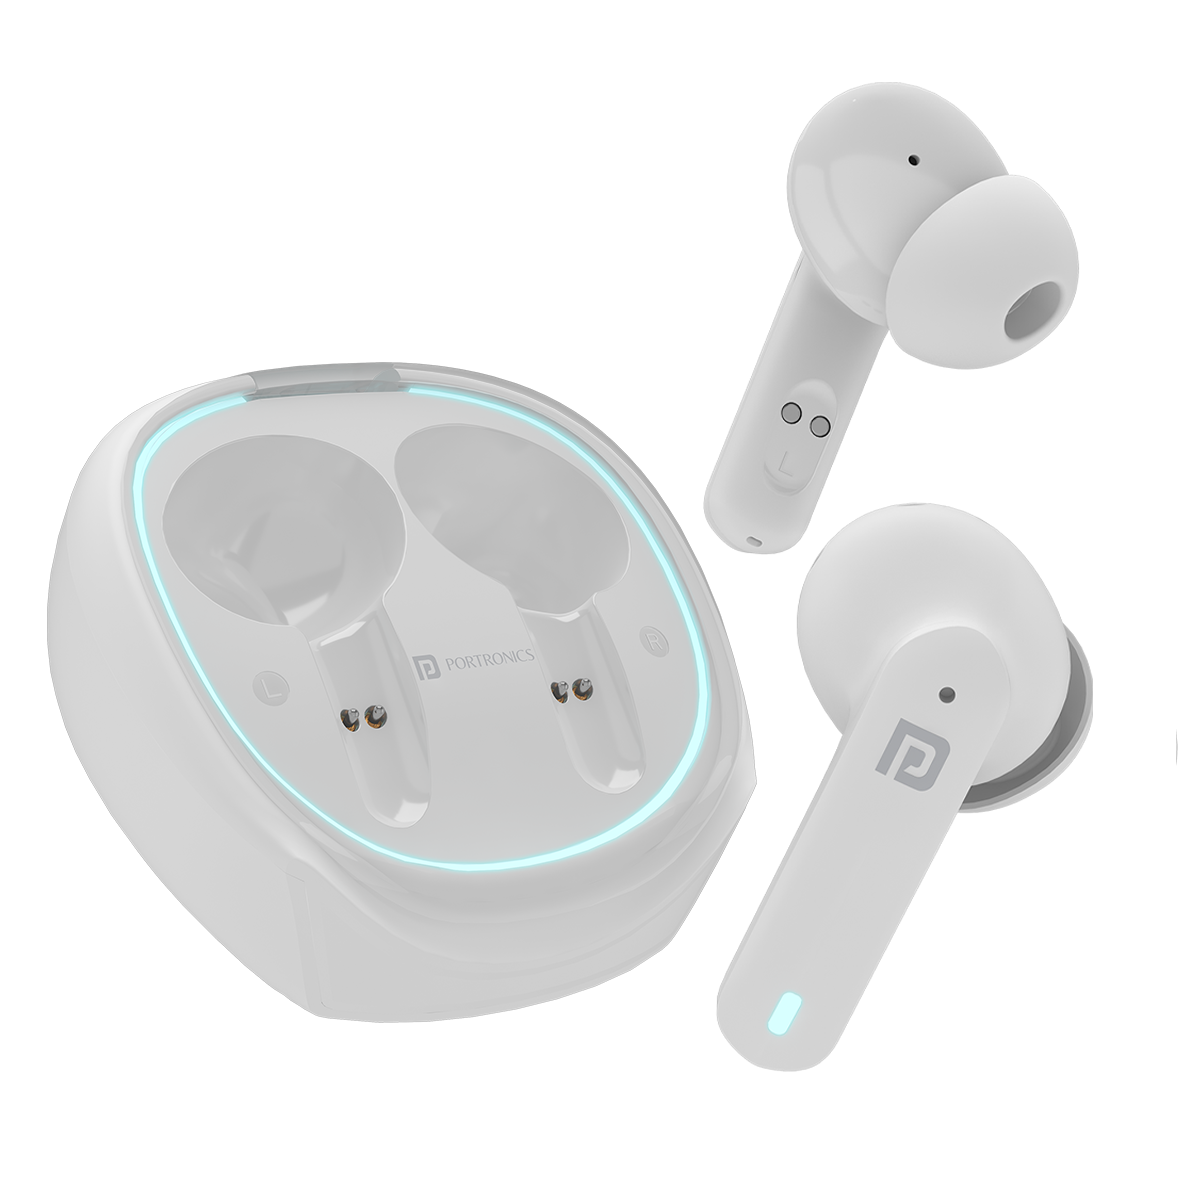 White Portronics Harmonics Twins s11 |wireless earbuds| best earbuds online at low price